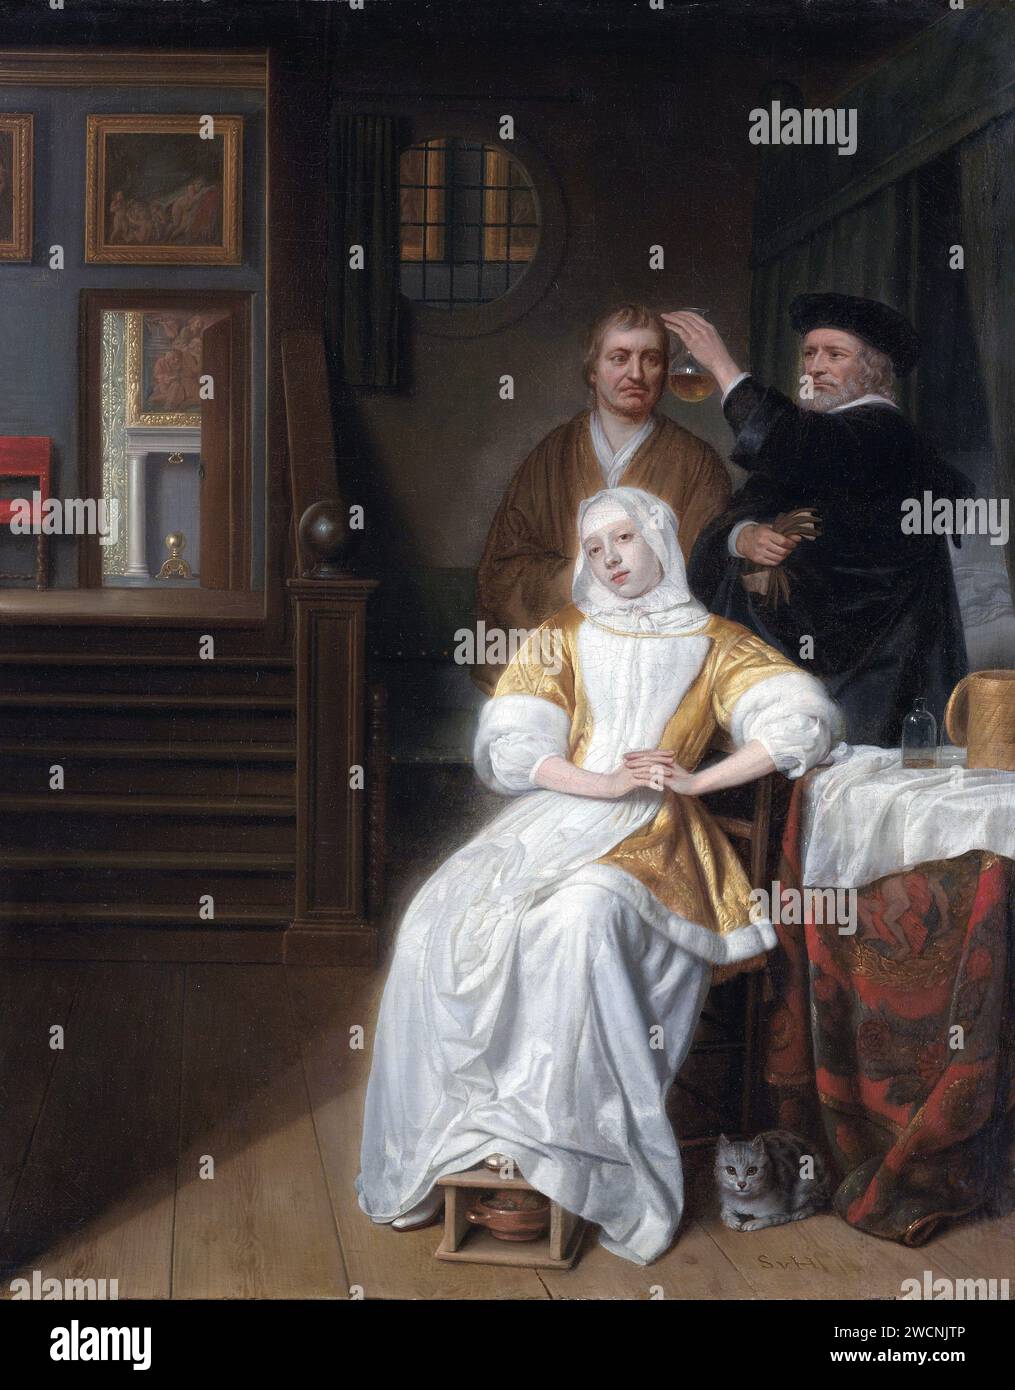 The anemic lady, 1667, Painting by Samuel van Hoogstraten Stock Photo